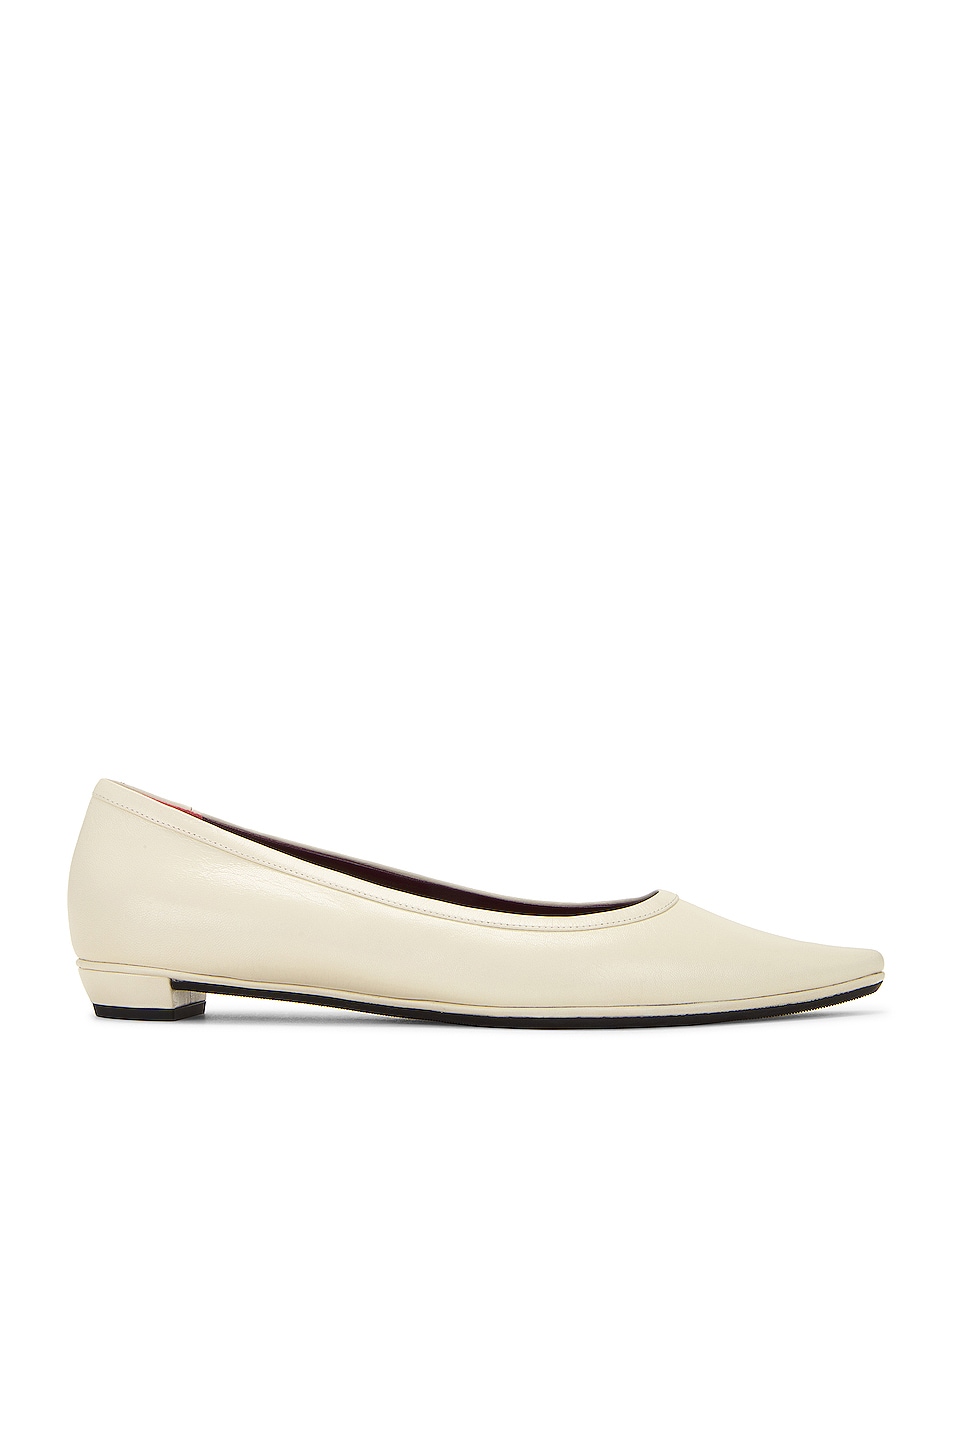 Image 1 of The Row Claudette Flat in Ivory